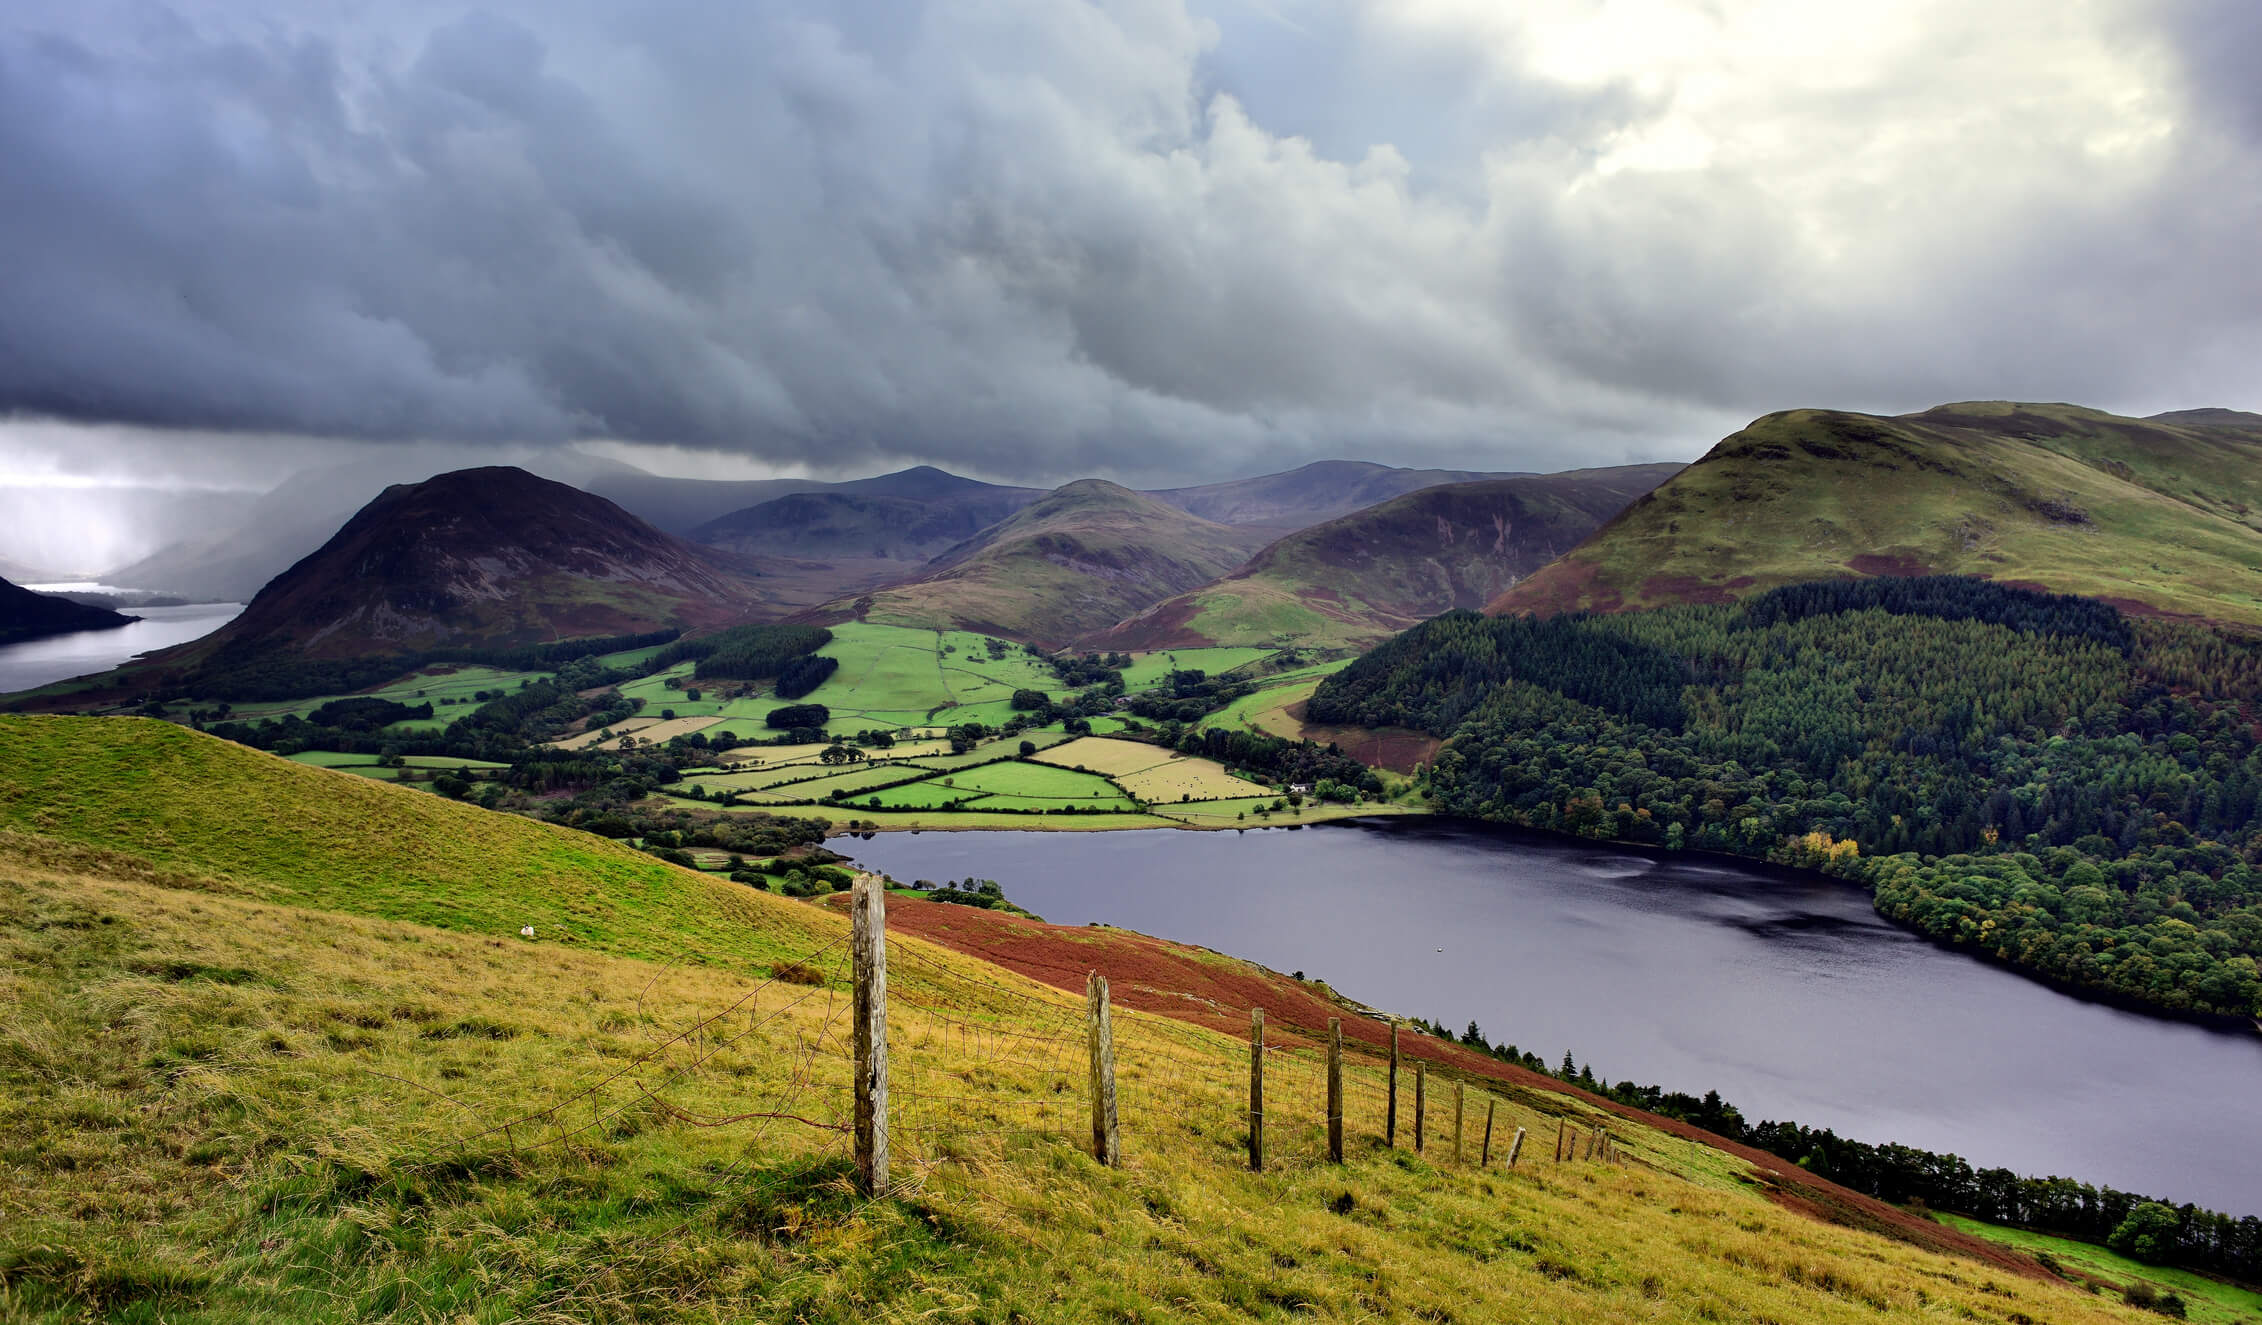 Looking over Loweswater from Darling Fell